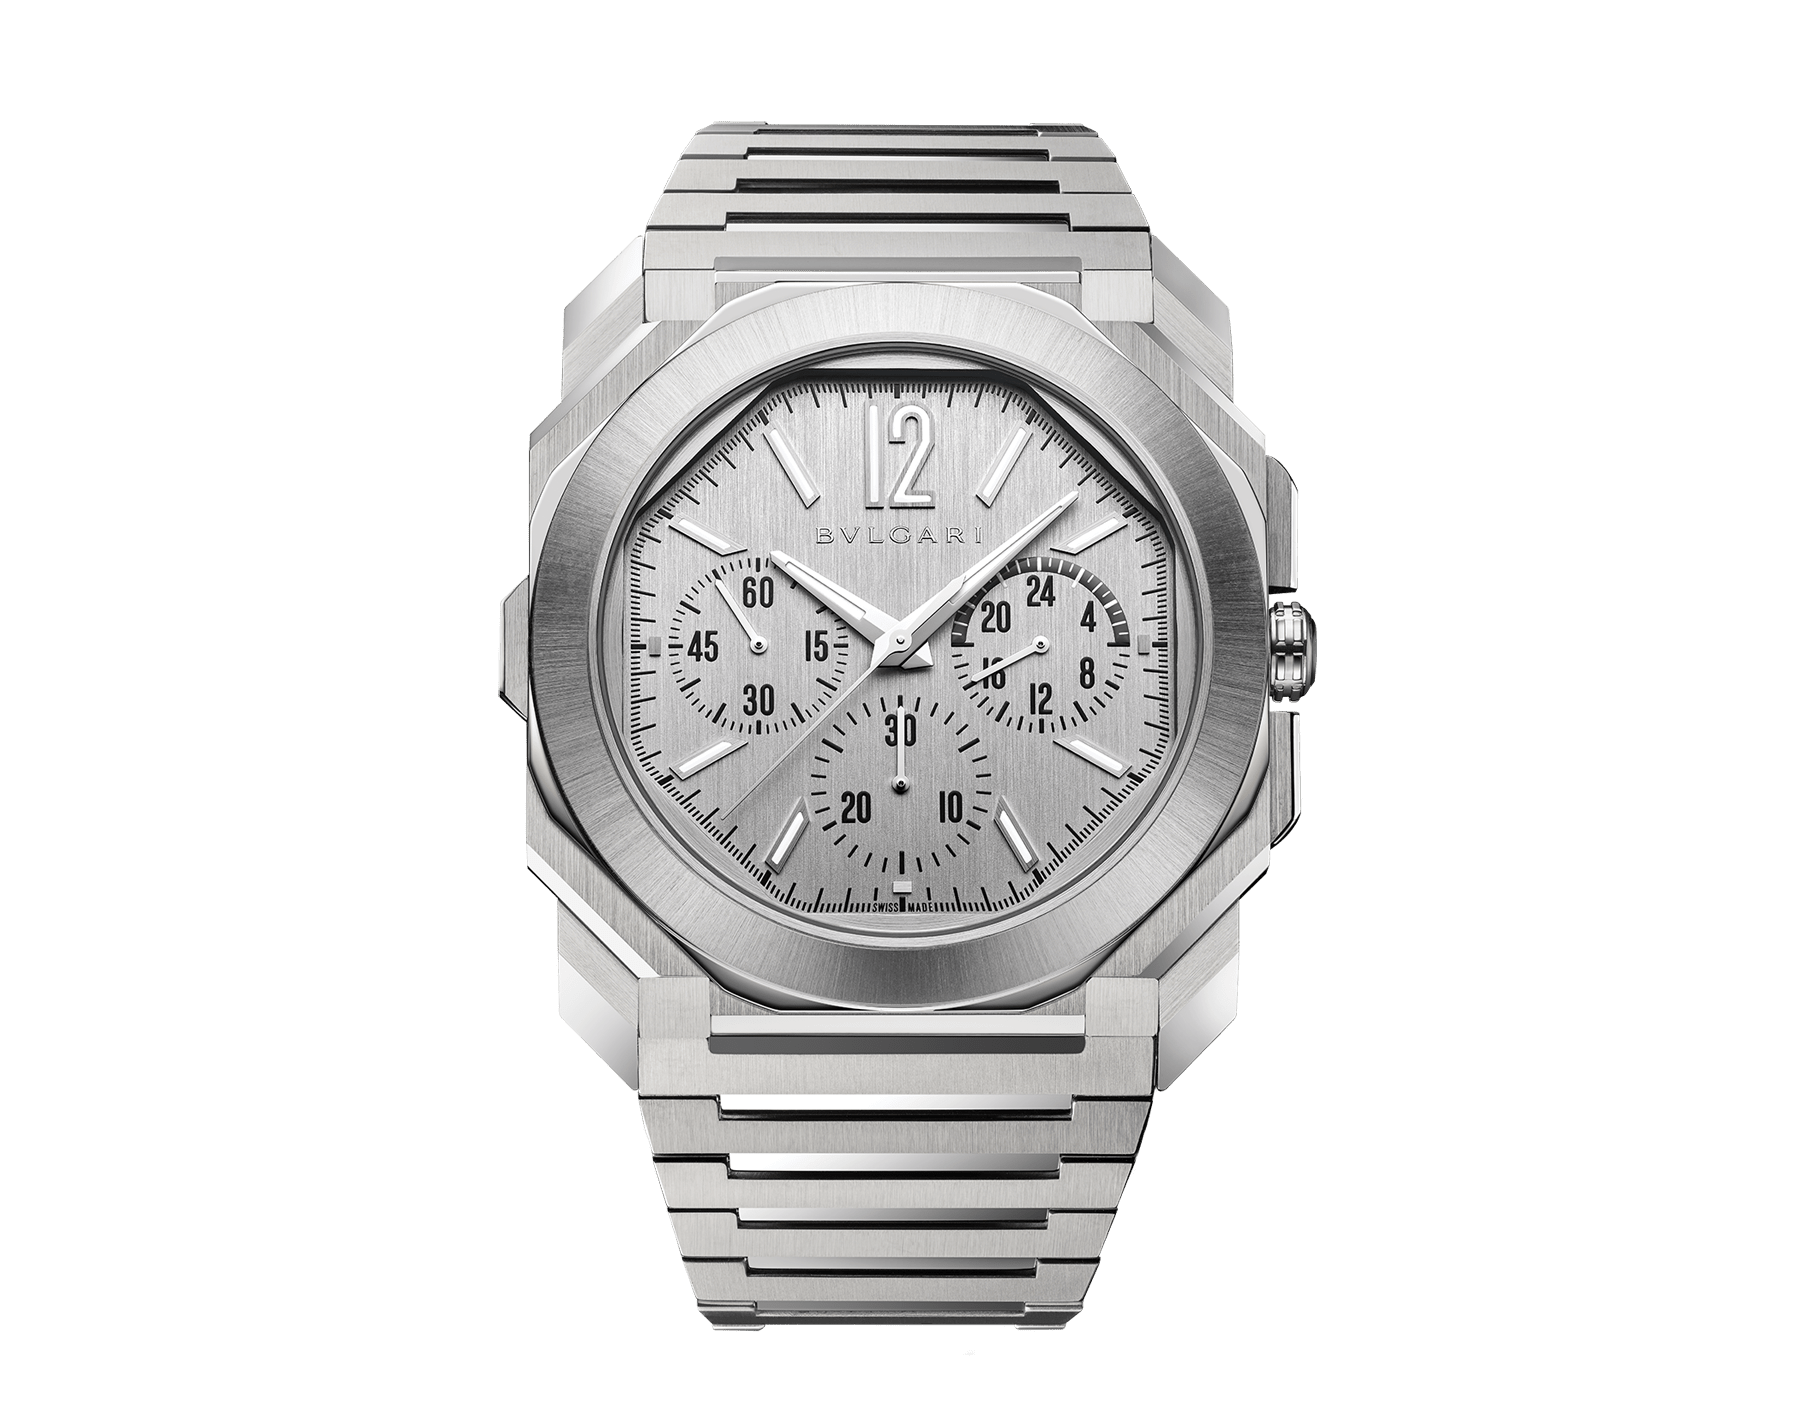 Octo Finissimo Chronograph GMT watch with mechanical manufacture ultra-thin movement (3.30 mm thick), automatic winding, 43 mm satin-polished stainless steel case and bracelet with silvered dial. Water-resistant up to 100 meters. 103661 image 1